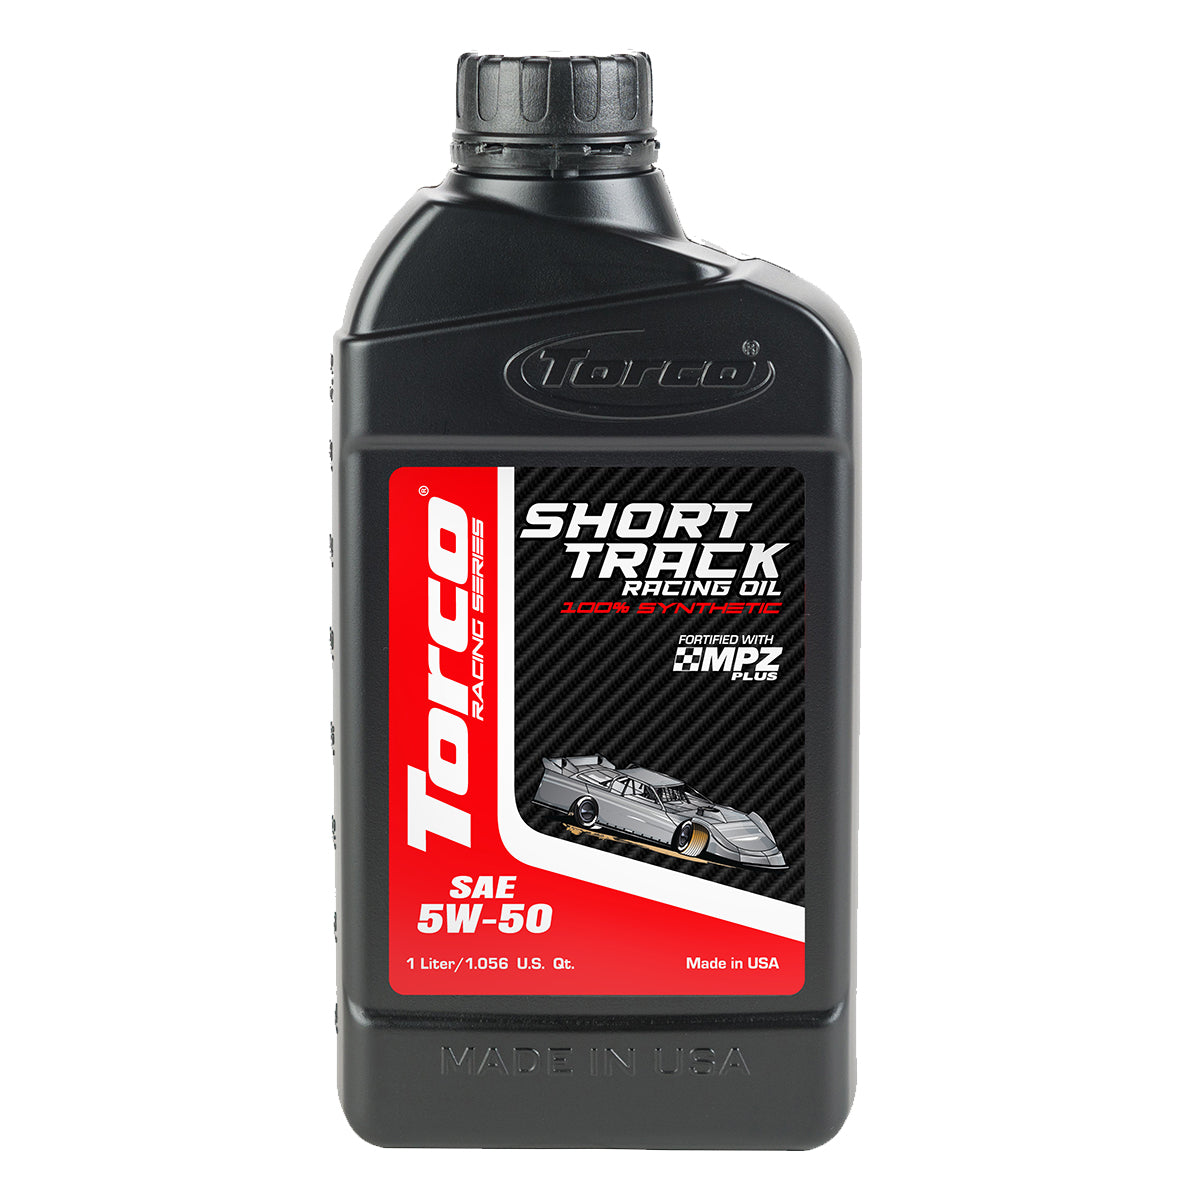 Torco V-Series Transmission Lube 75w90 – Torco Race Fuels